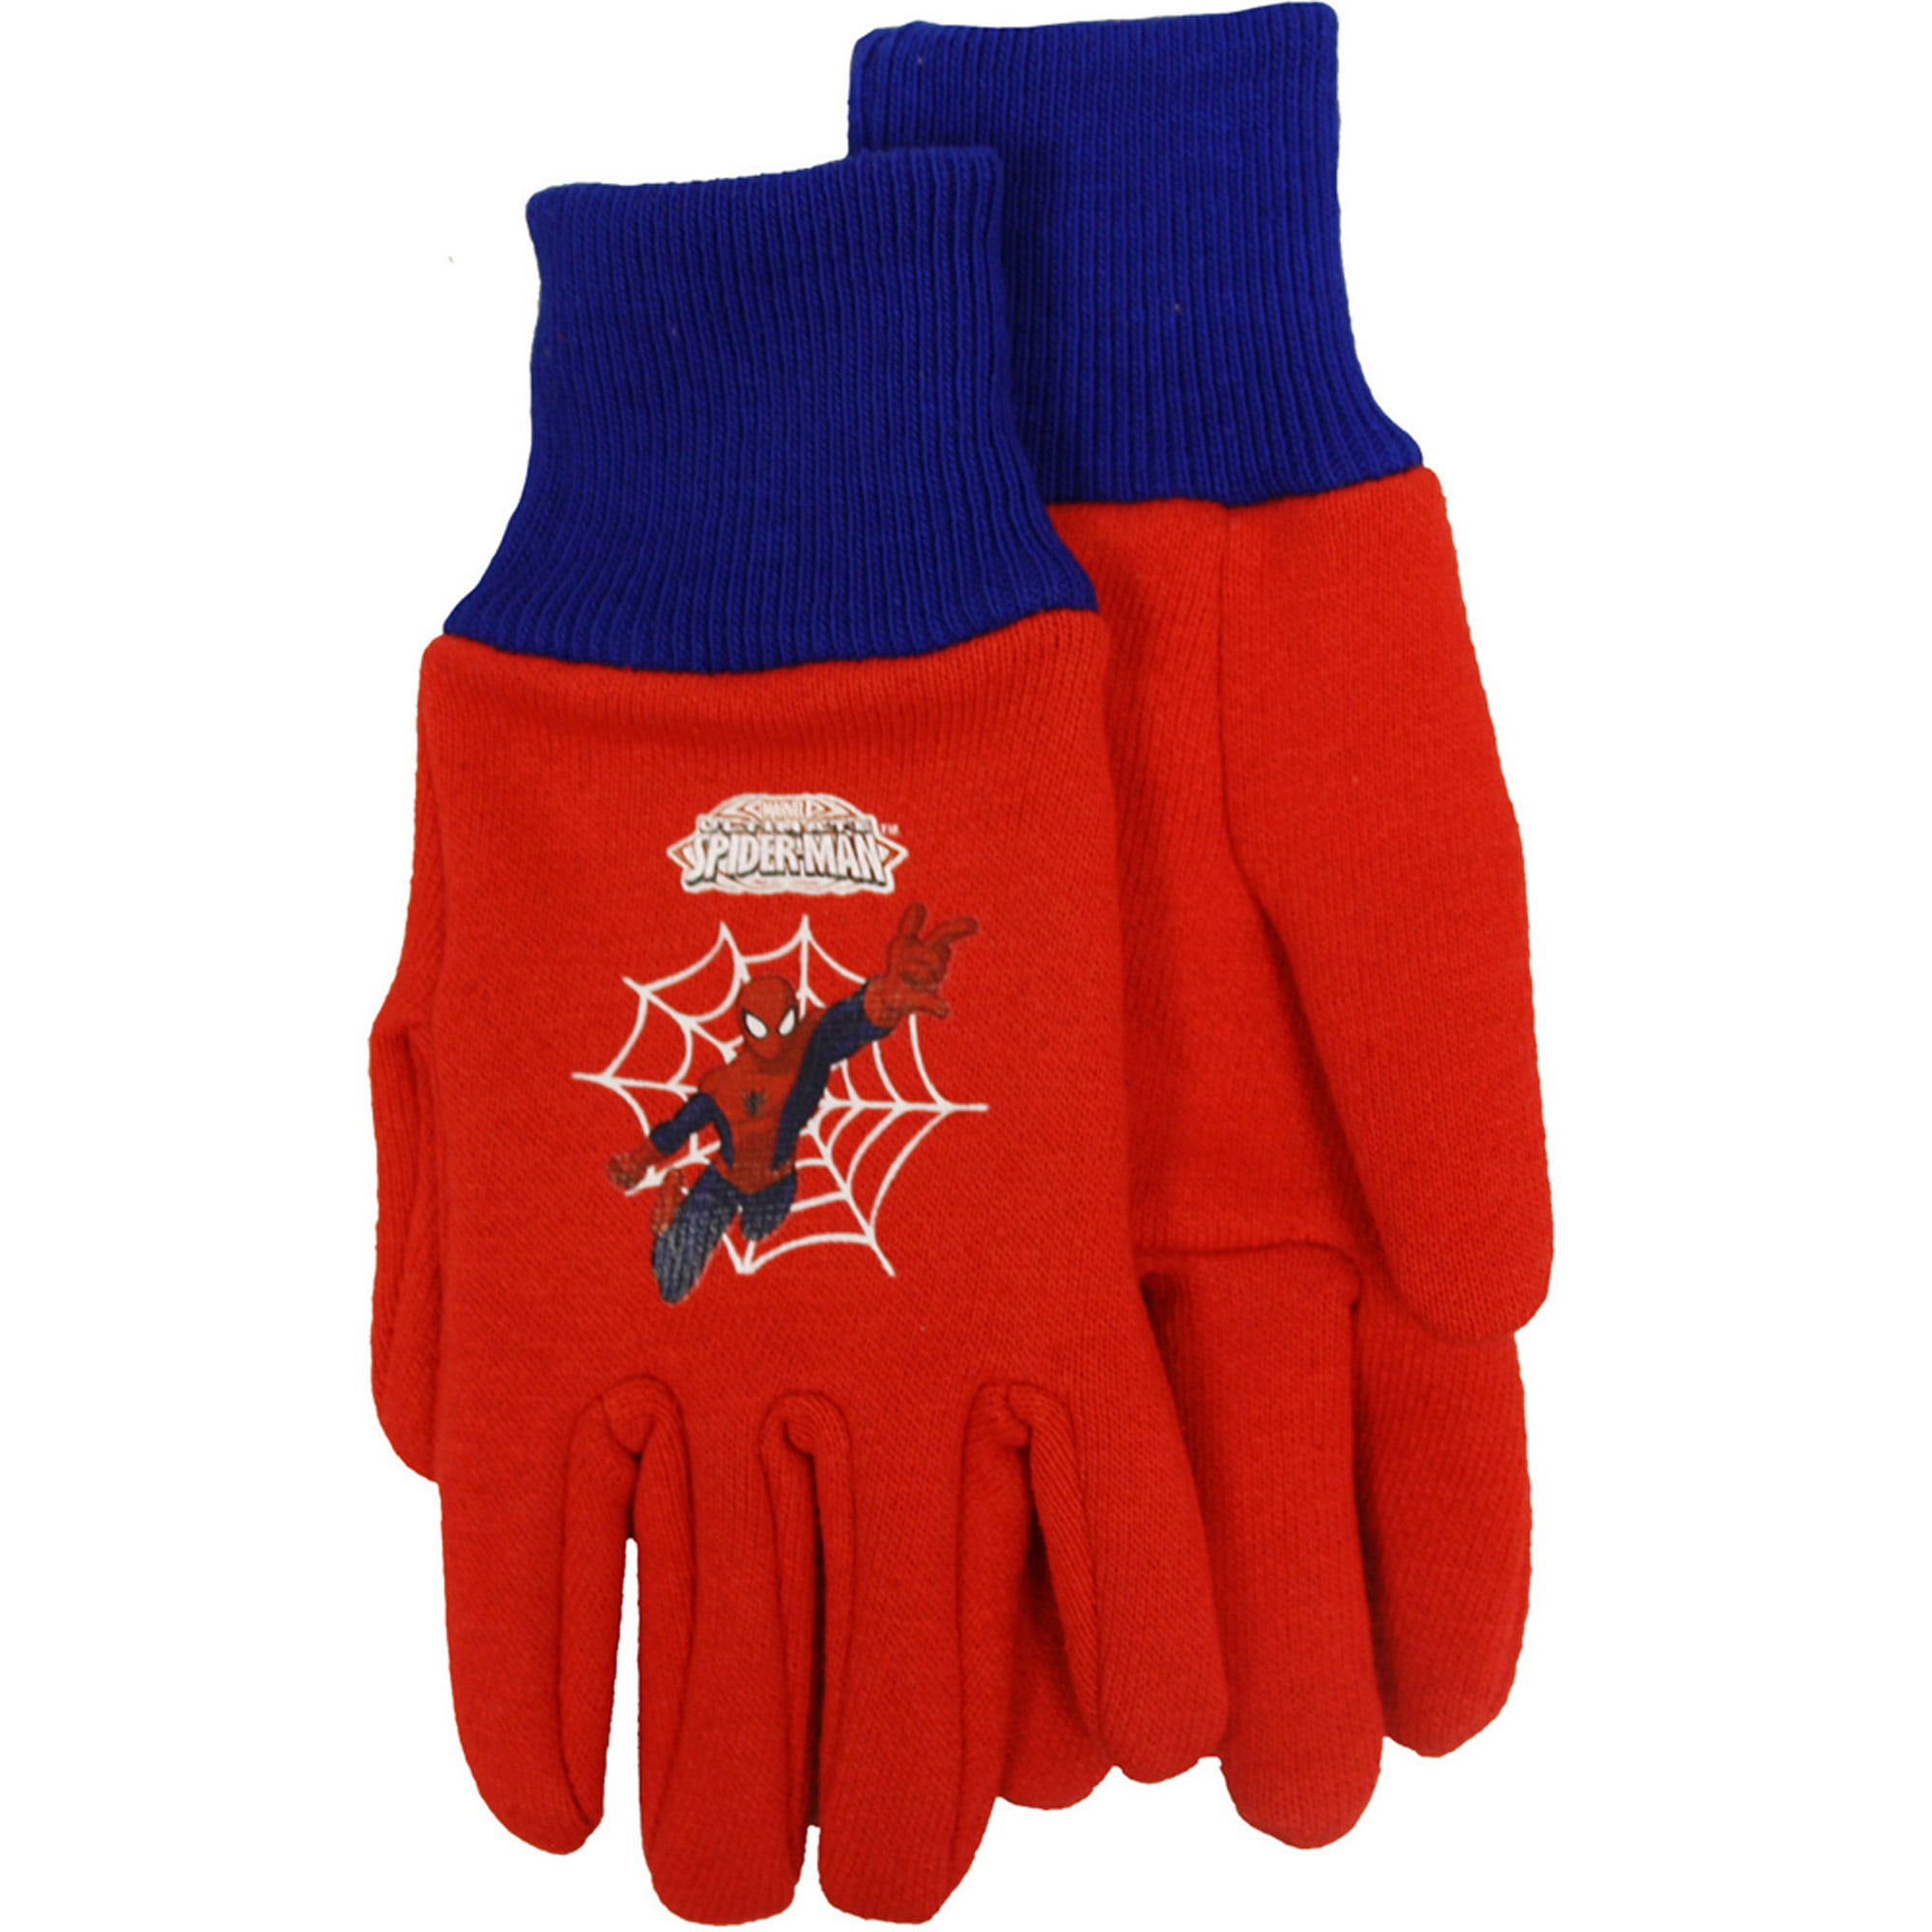 Student Sports Half-finger Gloves CXJC Childrens Spring And Summer Spider-Man Pattern Gloves Cartoon Horizontal Bar Balance Cycling Anti-skid Palm Gloves Four Colors To Choose From